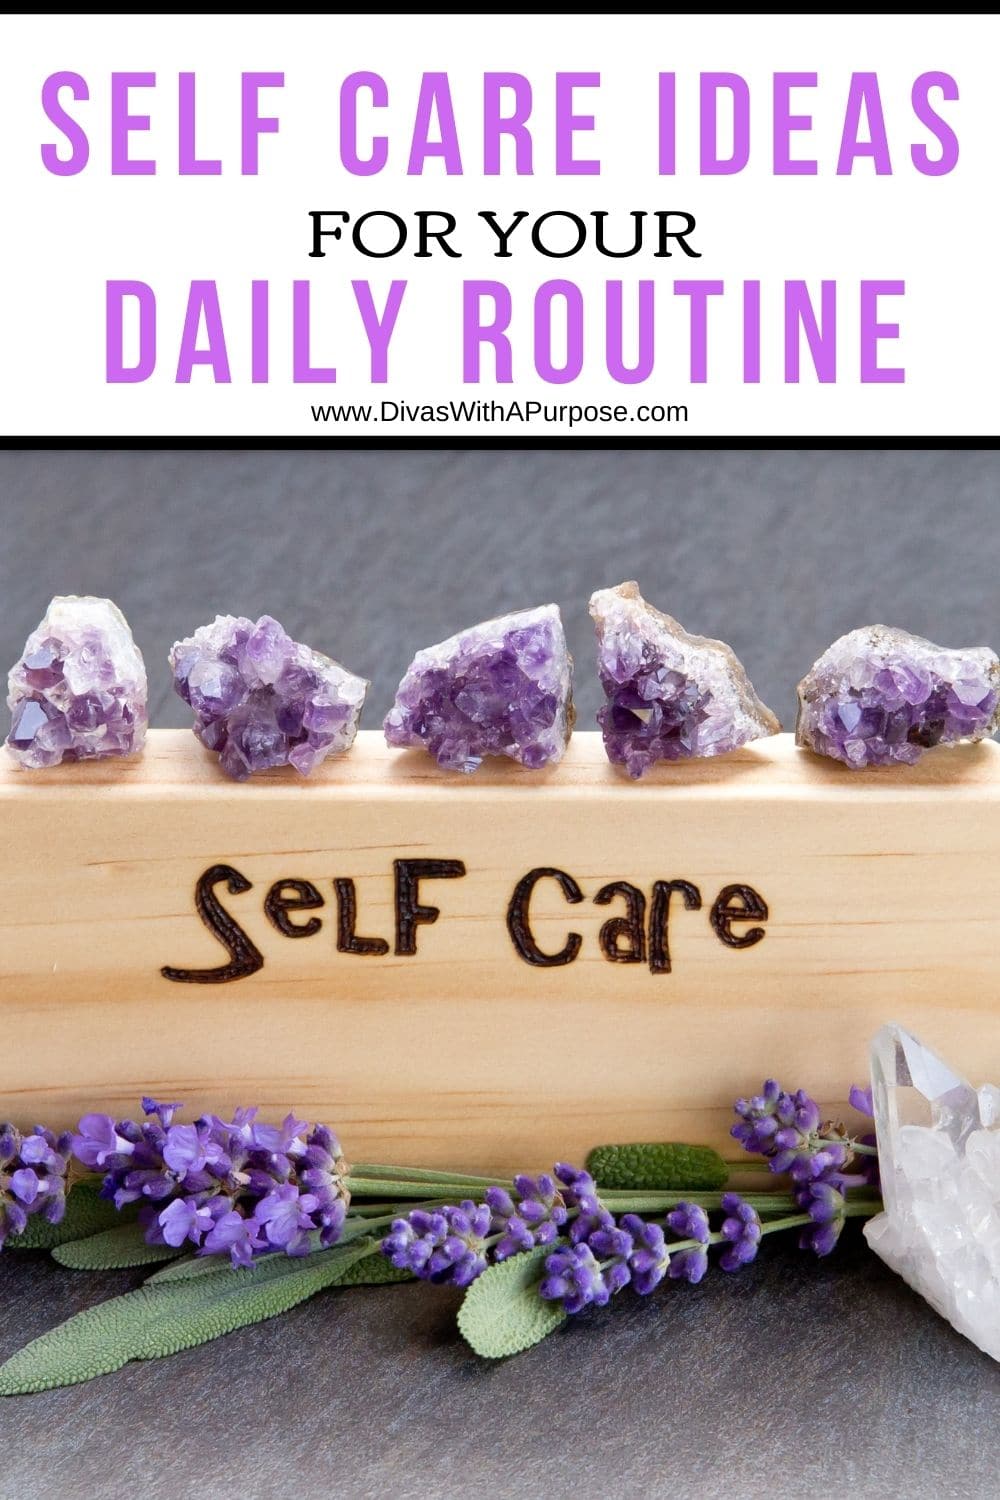 It is vital that you take care of your soul, mind, and body. Studies show adding a self care routine to your daily activities helps reduce stress. You can also reduce your chances of mental and physical ailments.